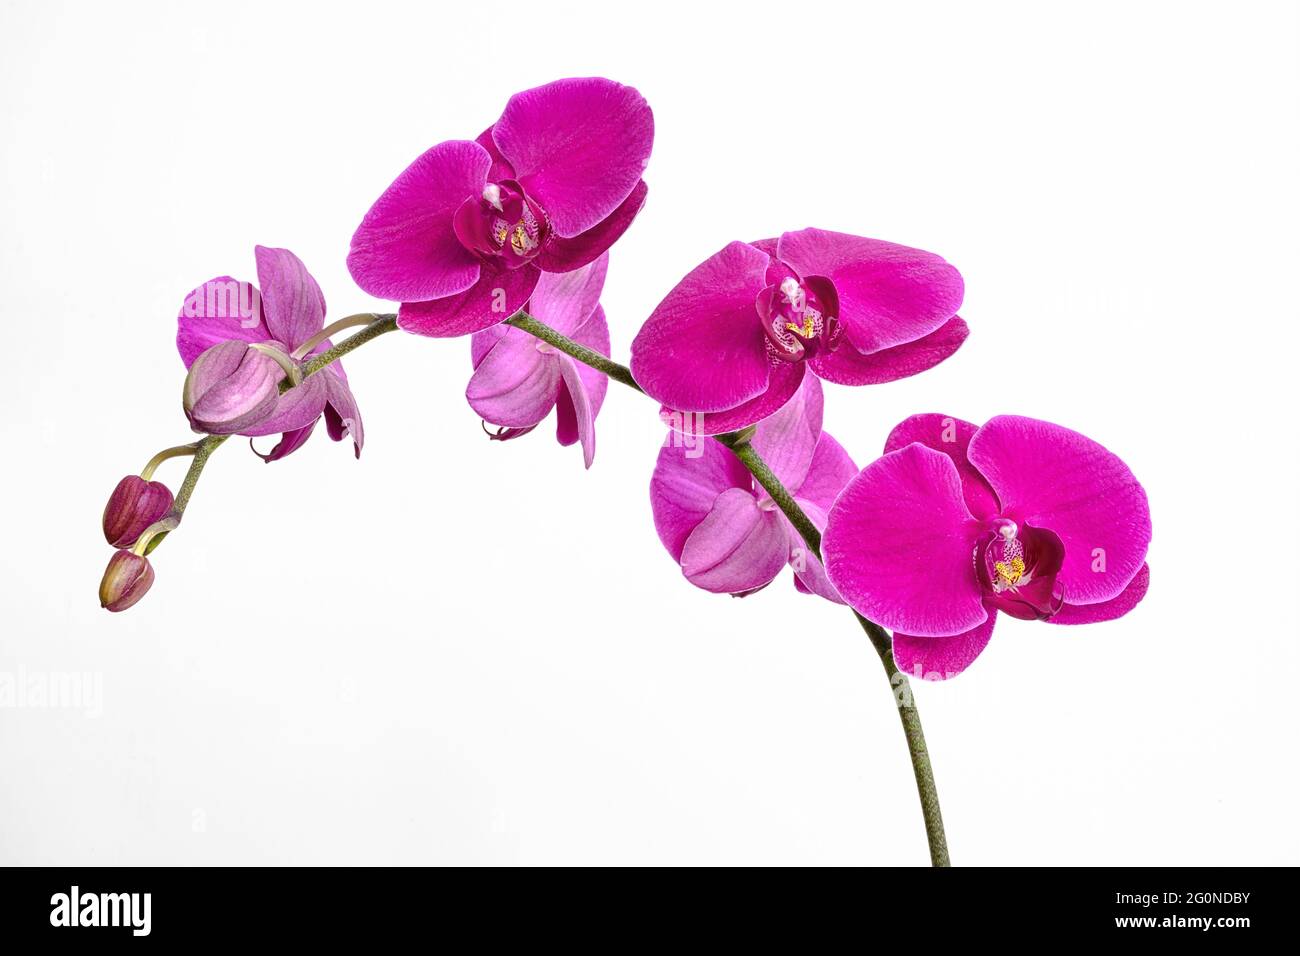 Purple orchid flowers, Orchidaceae, phalaenopsis or falah, or butterfly orchids, isolated on a white background. Copy space. Stock Photo